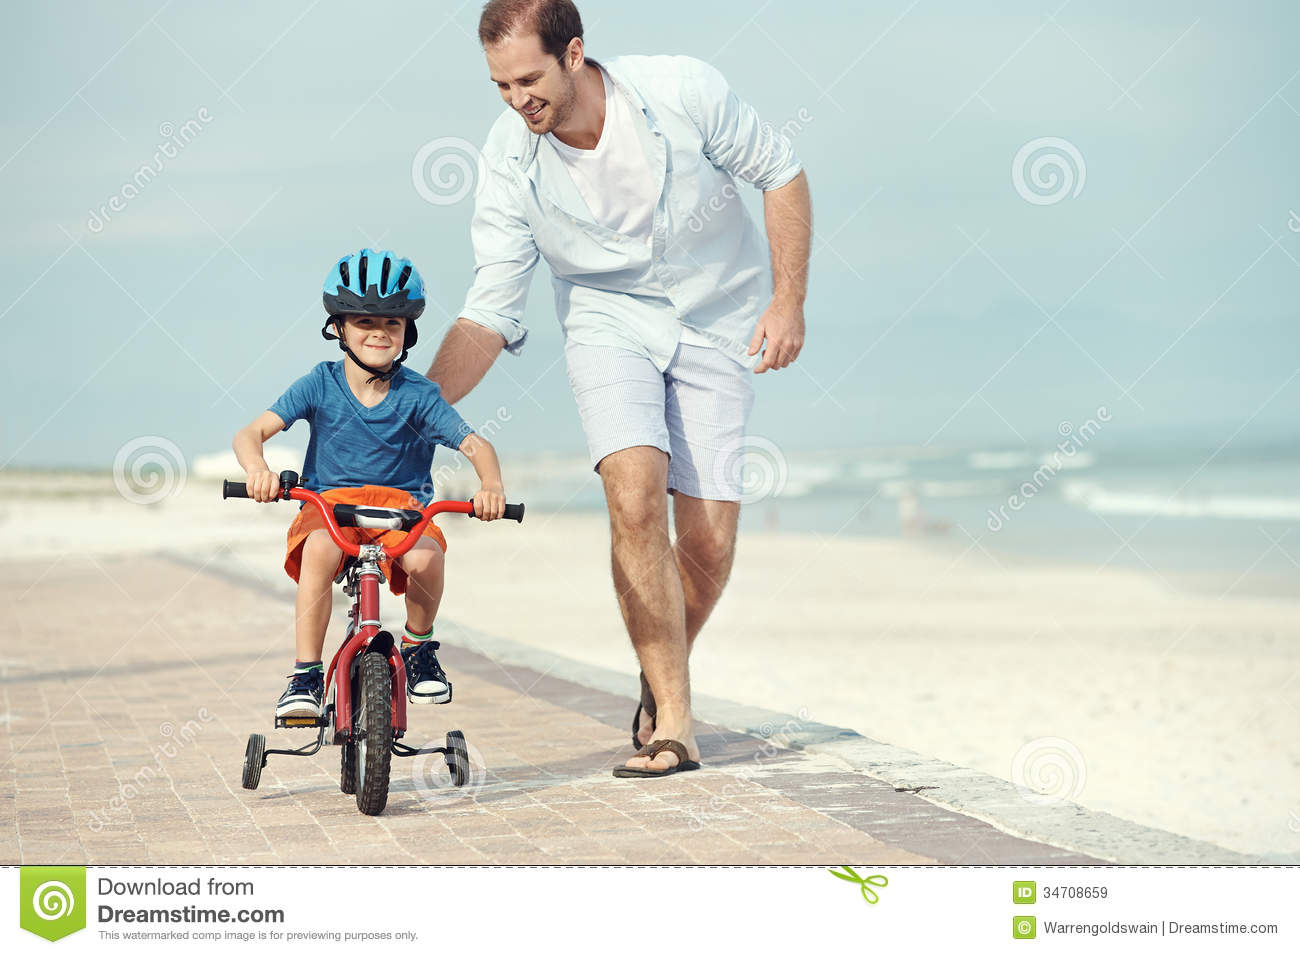 Learning To Ride A Bike Royalty Free Stock Images   Image  34708659